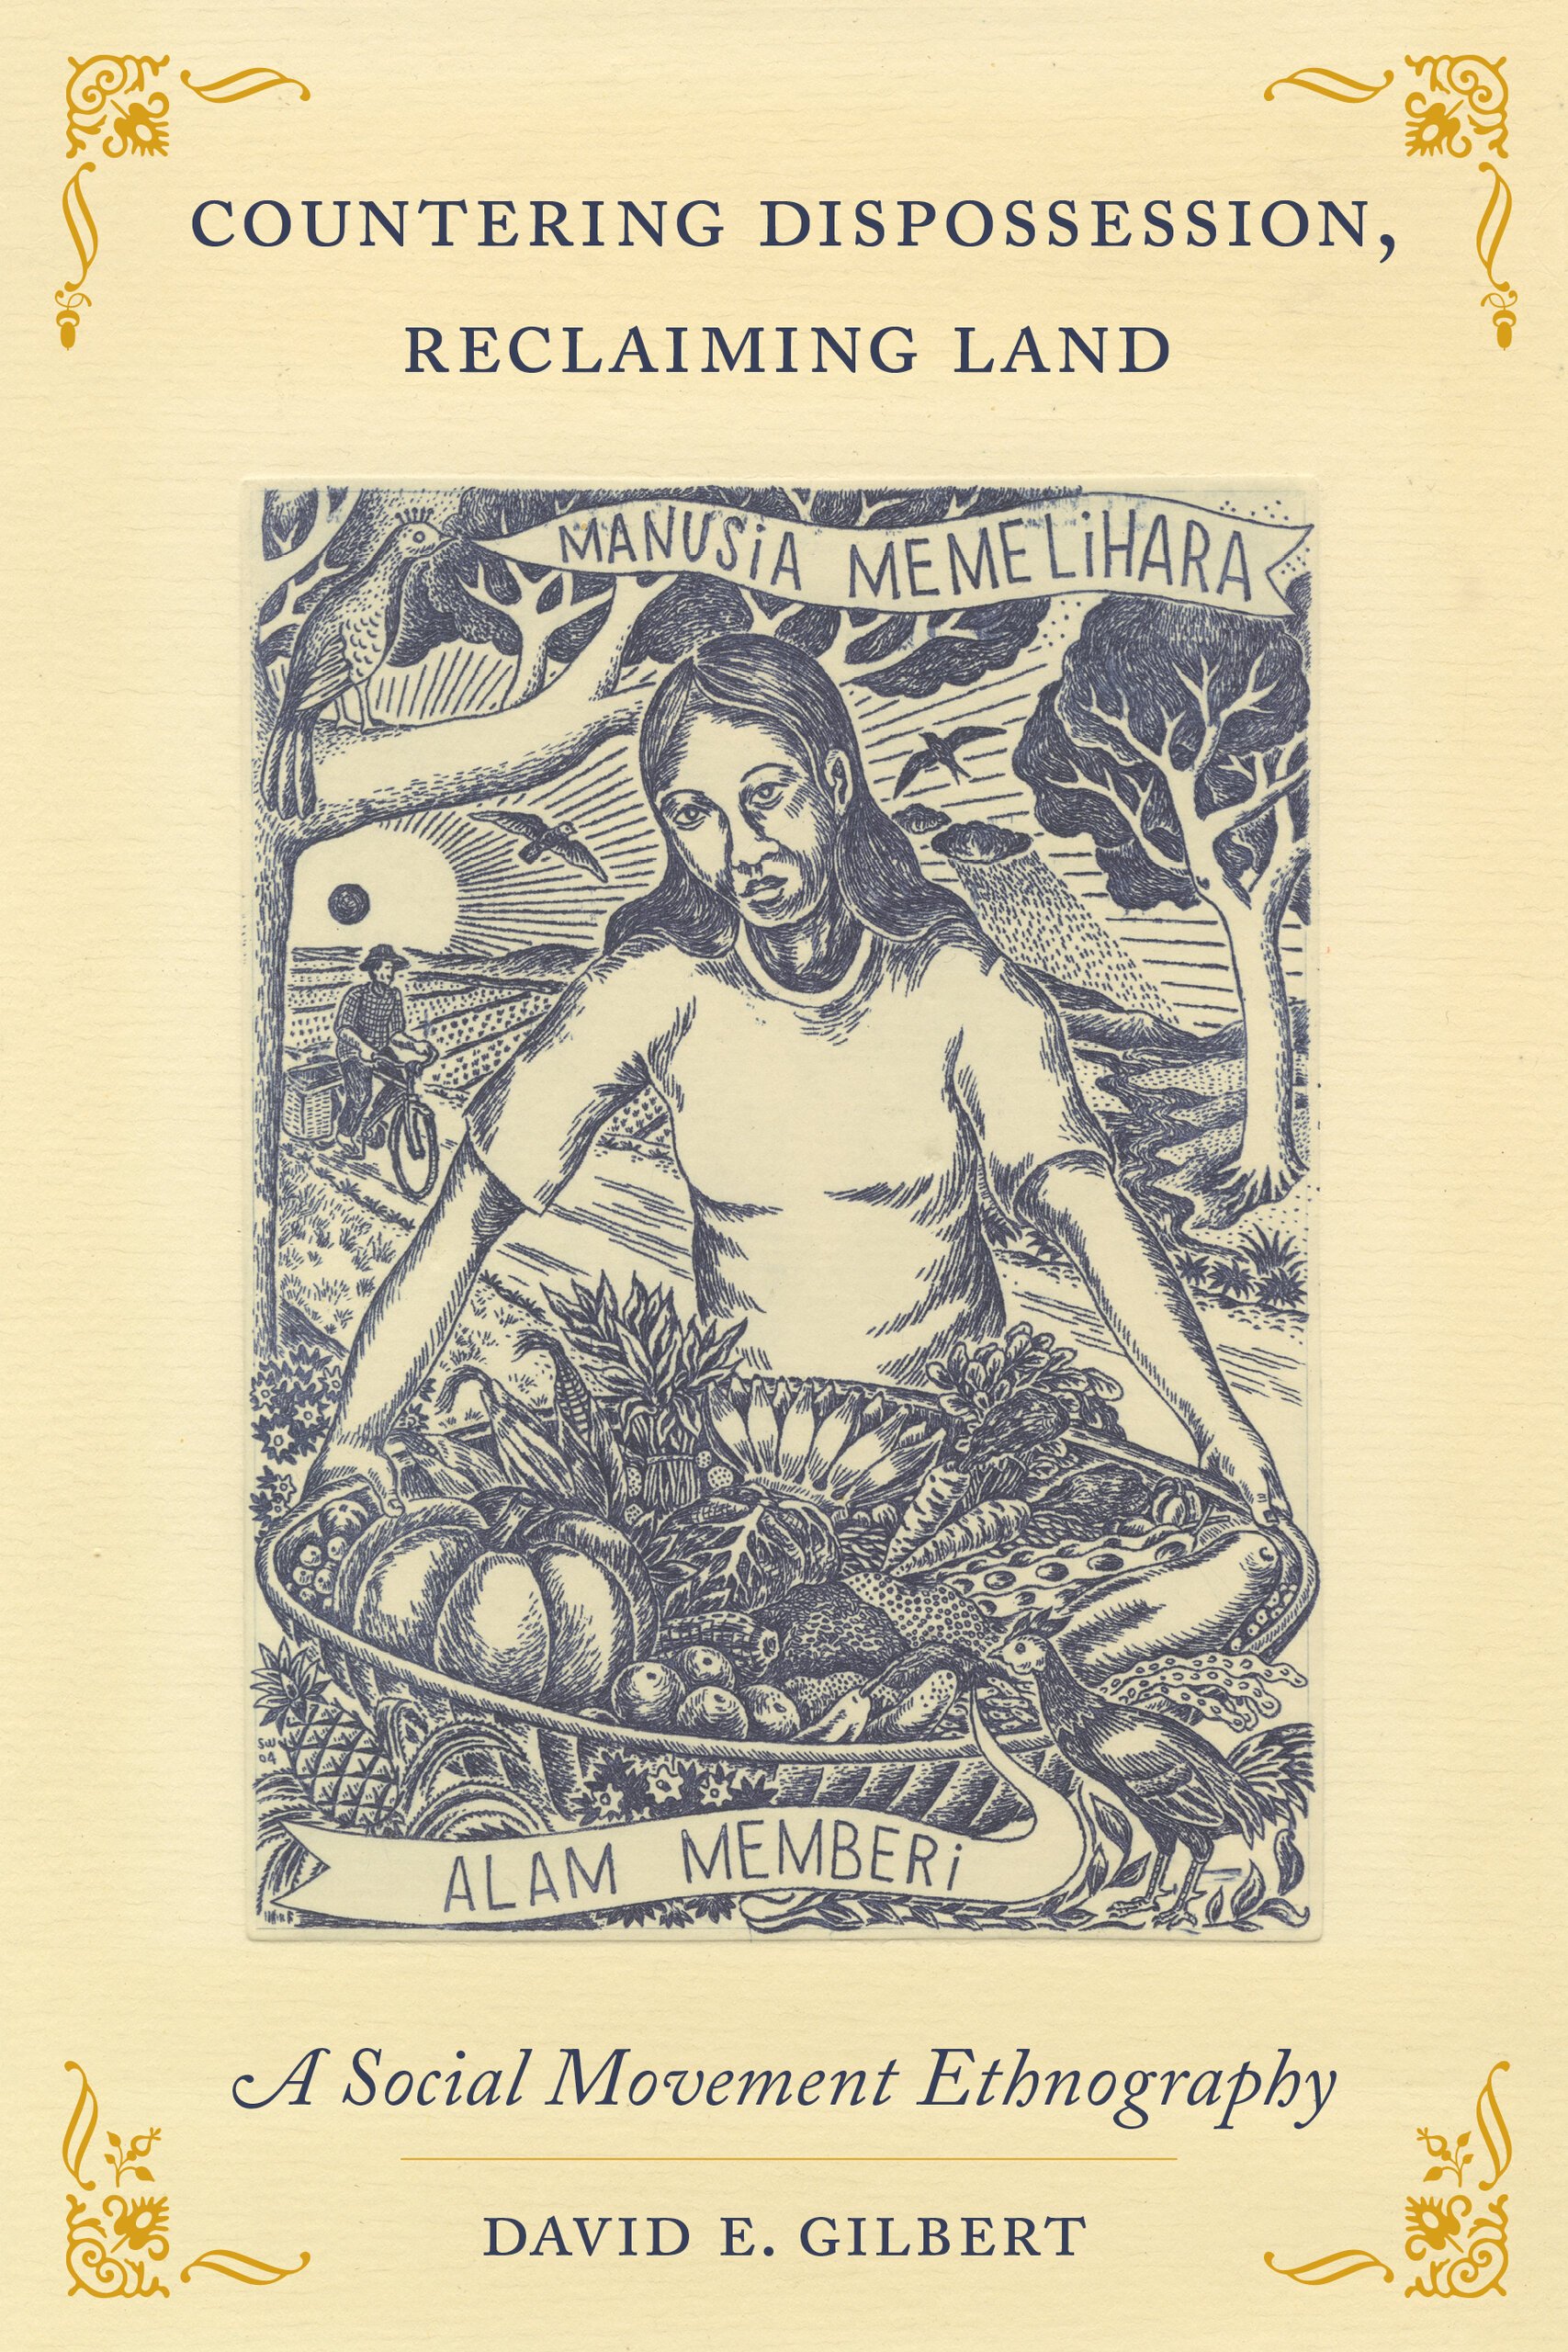 Book cover showing farms and bounty offered. Tile of the book is Countering Dispossession, Reclaiming Land , A social movement Ethnography by David E. Gilbert.